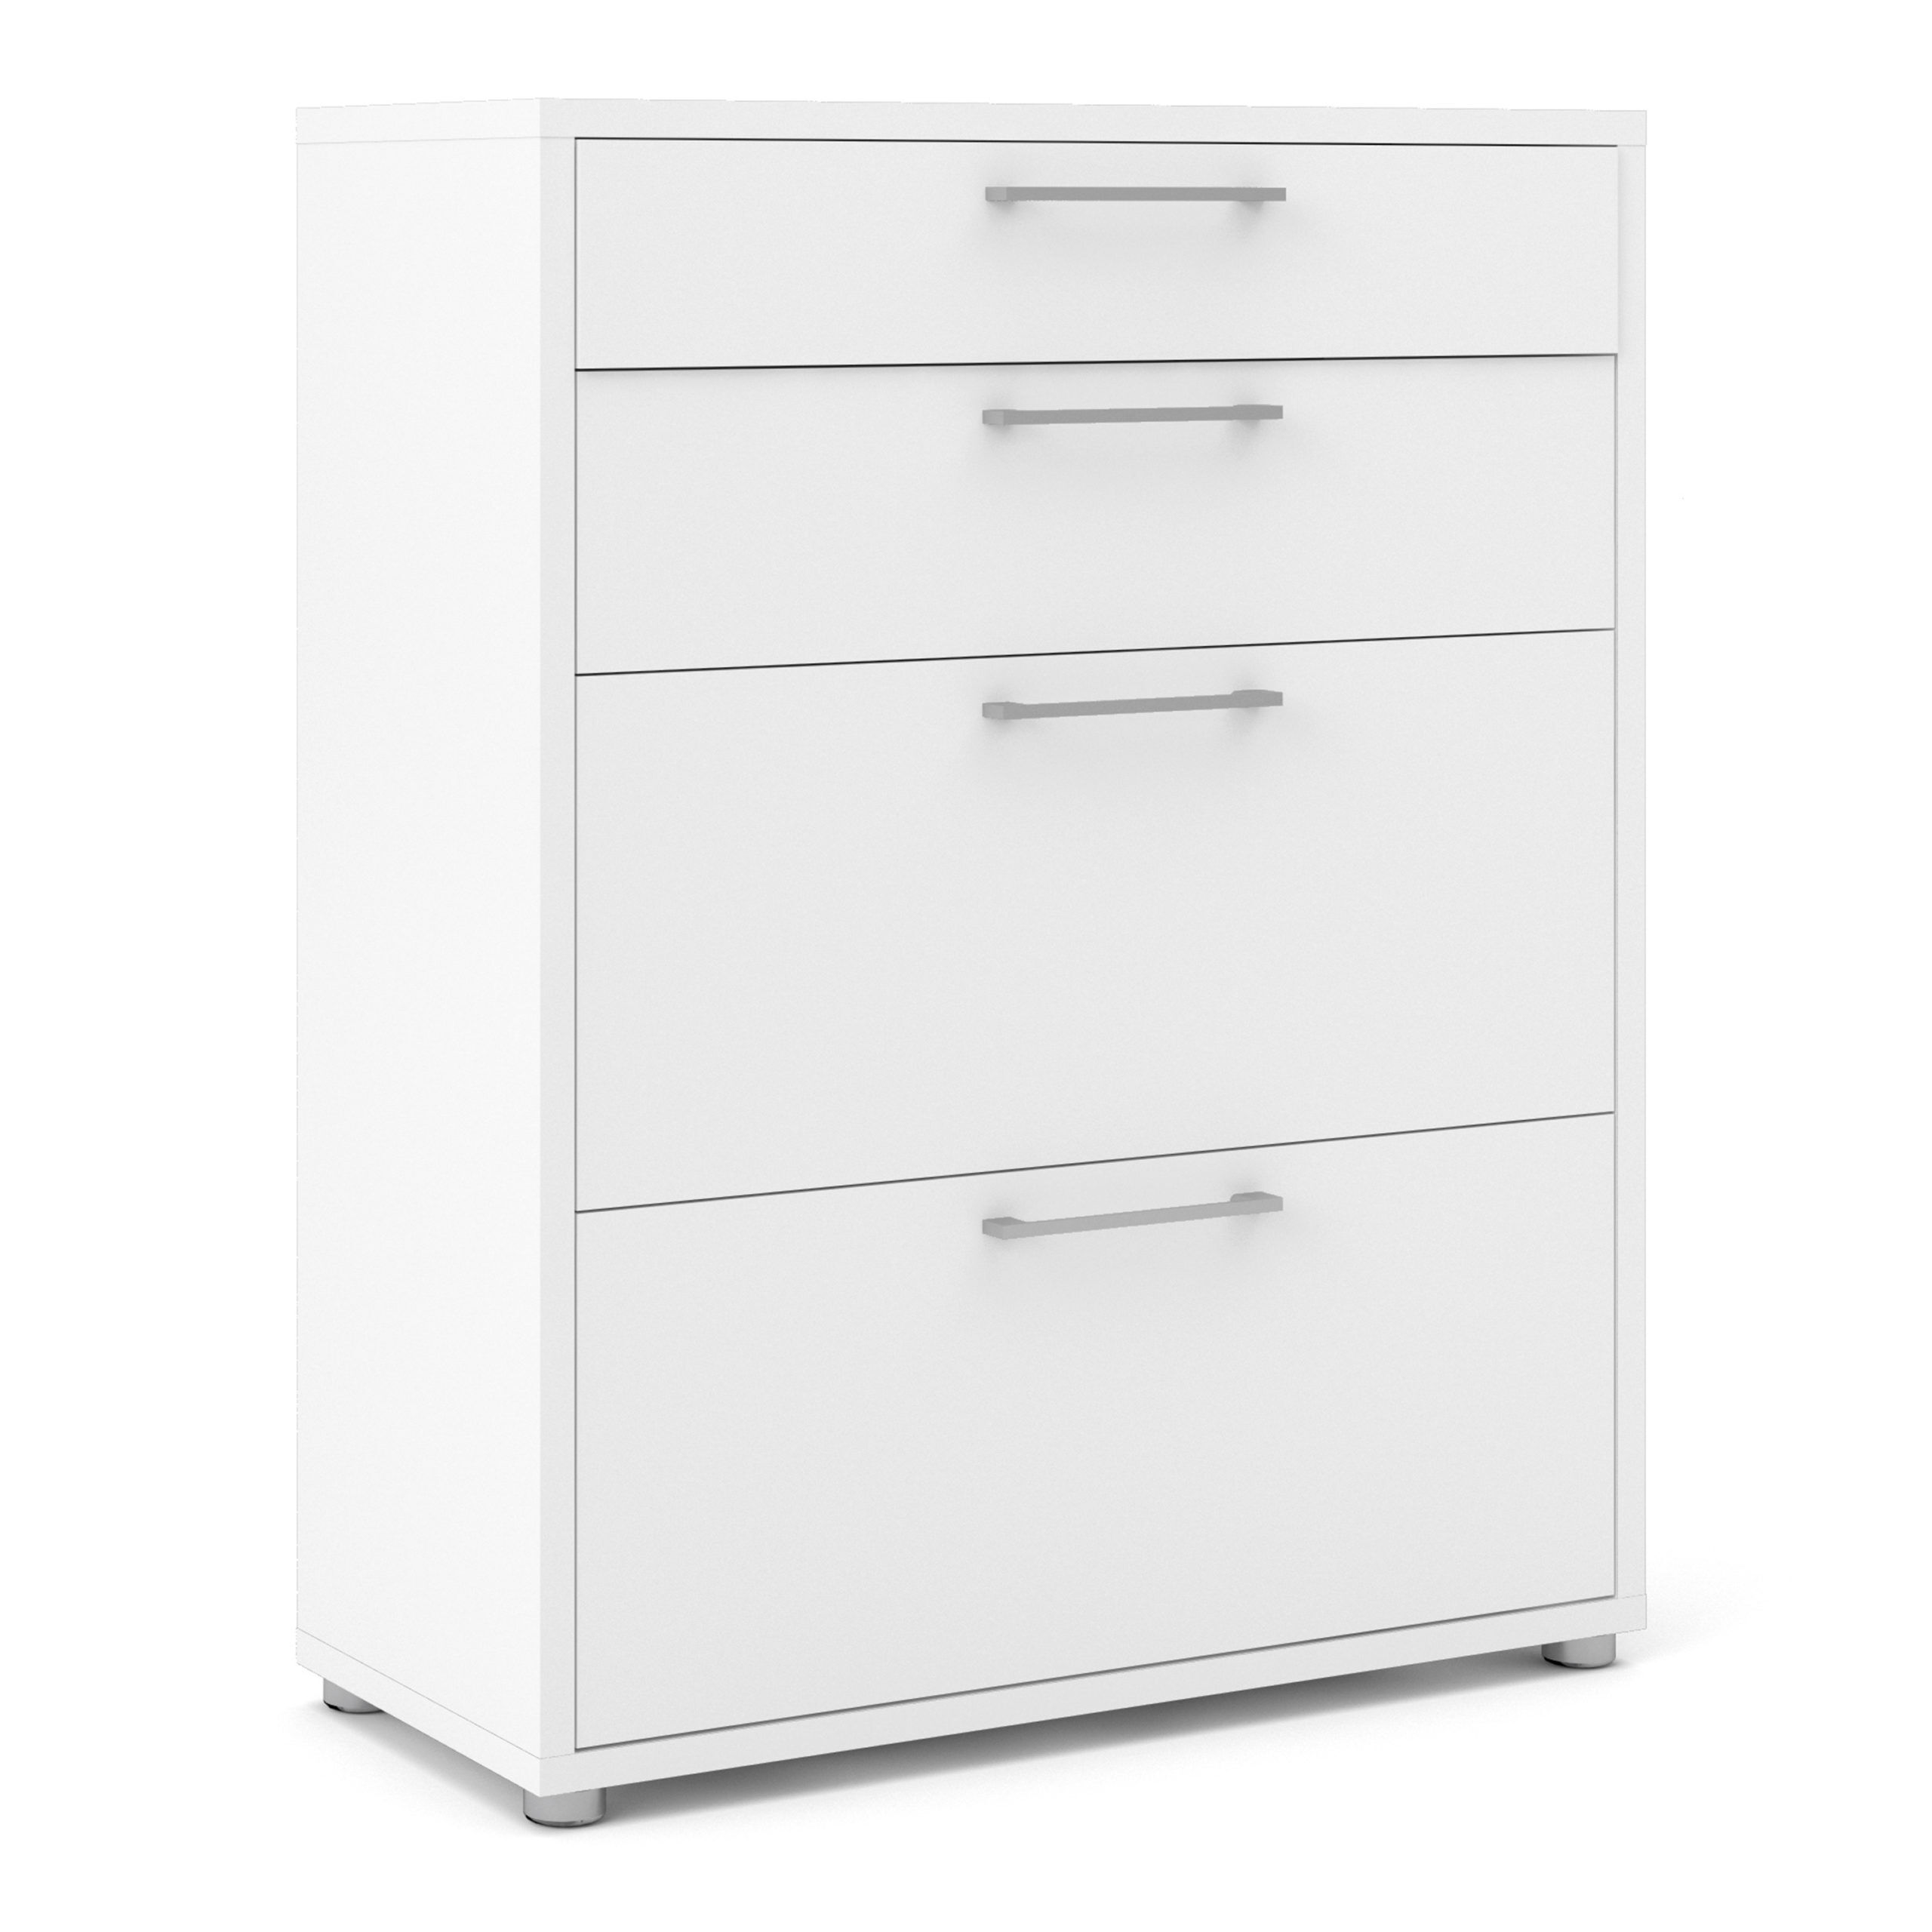 Photos - Office Desk Kansas Office Storage with 2 Drawers + 2 File Drawers in White Self Assemb